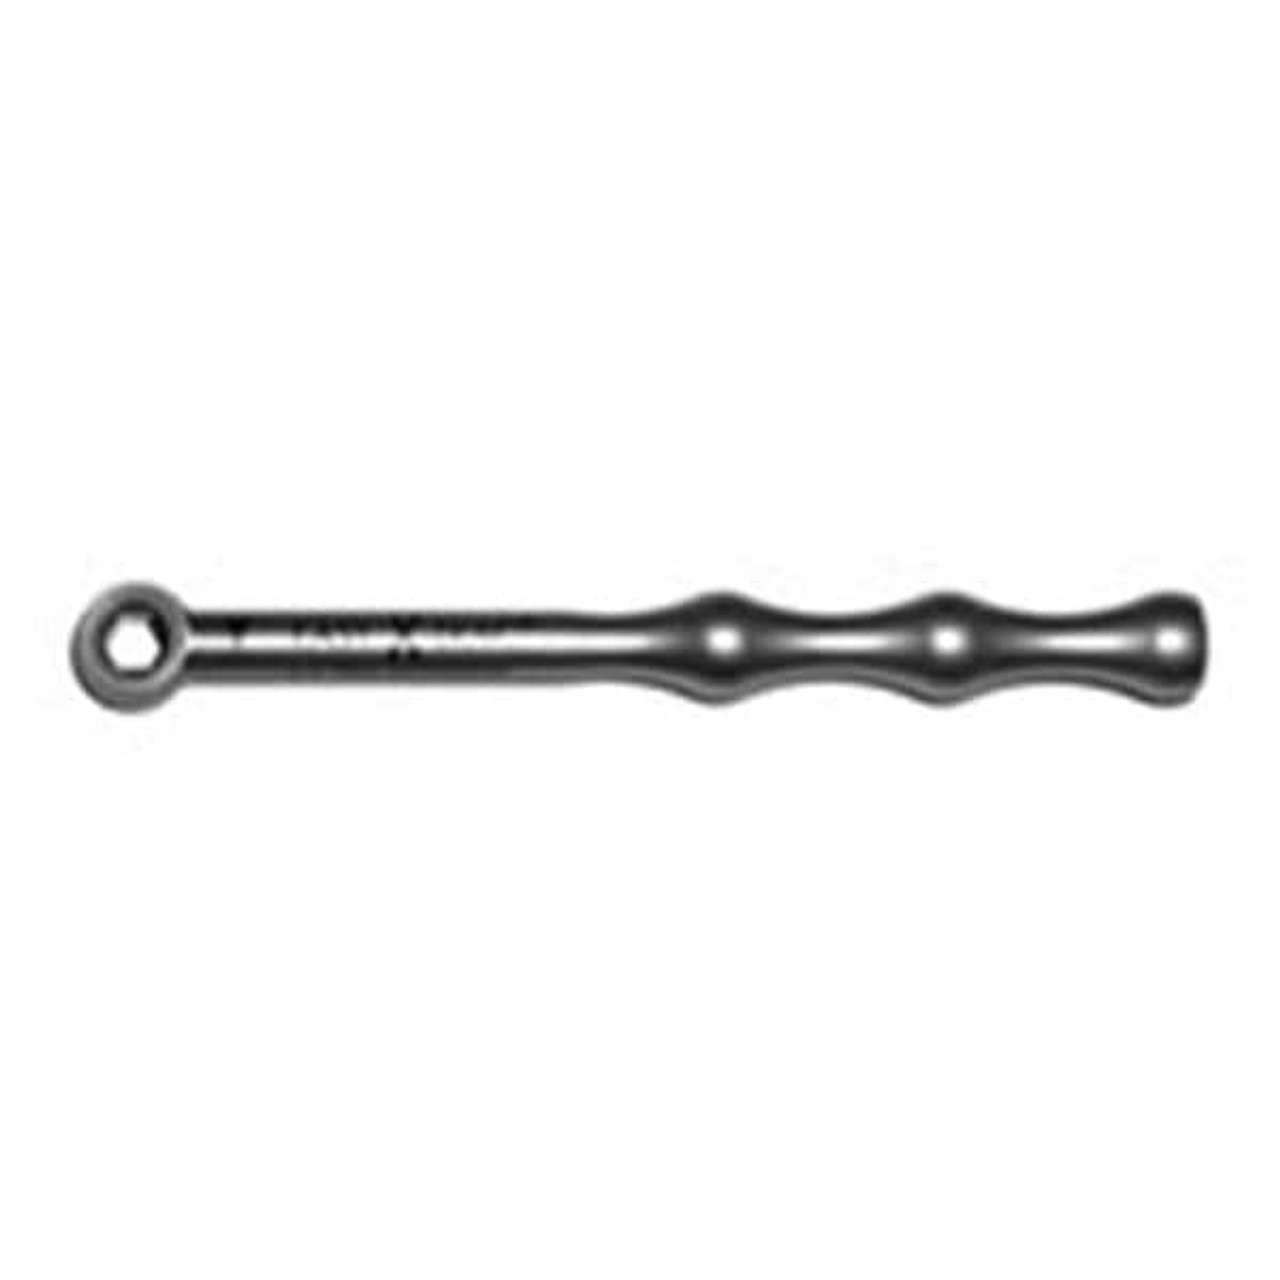 A.Titan - EASY X-TRAC Ratchet, for Extraction Screws